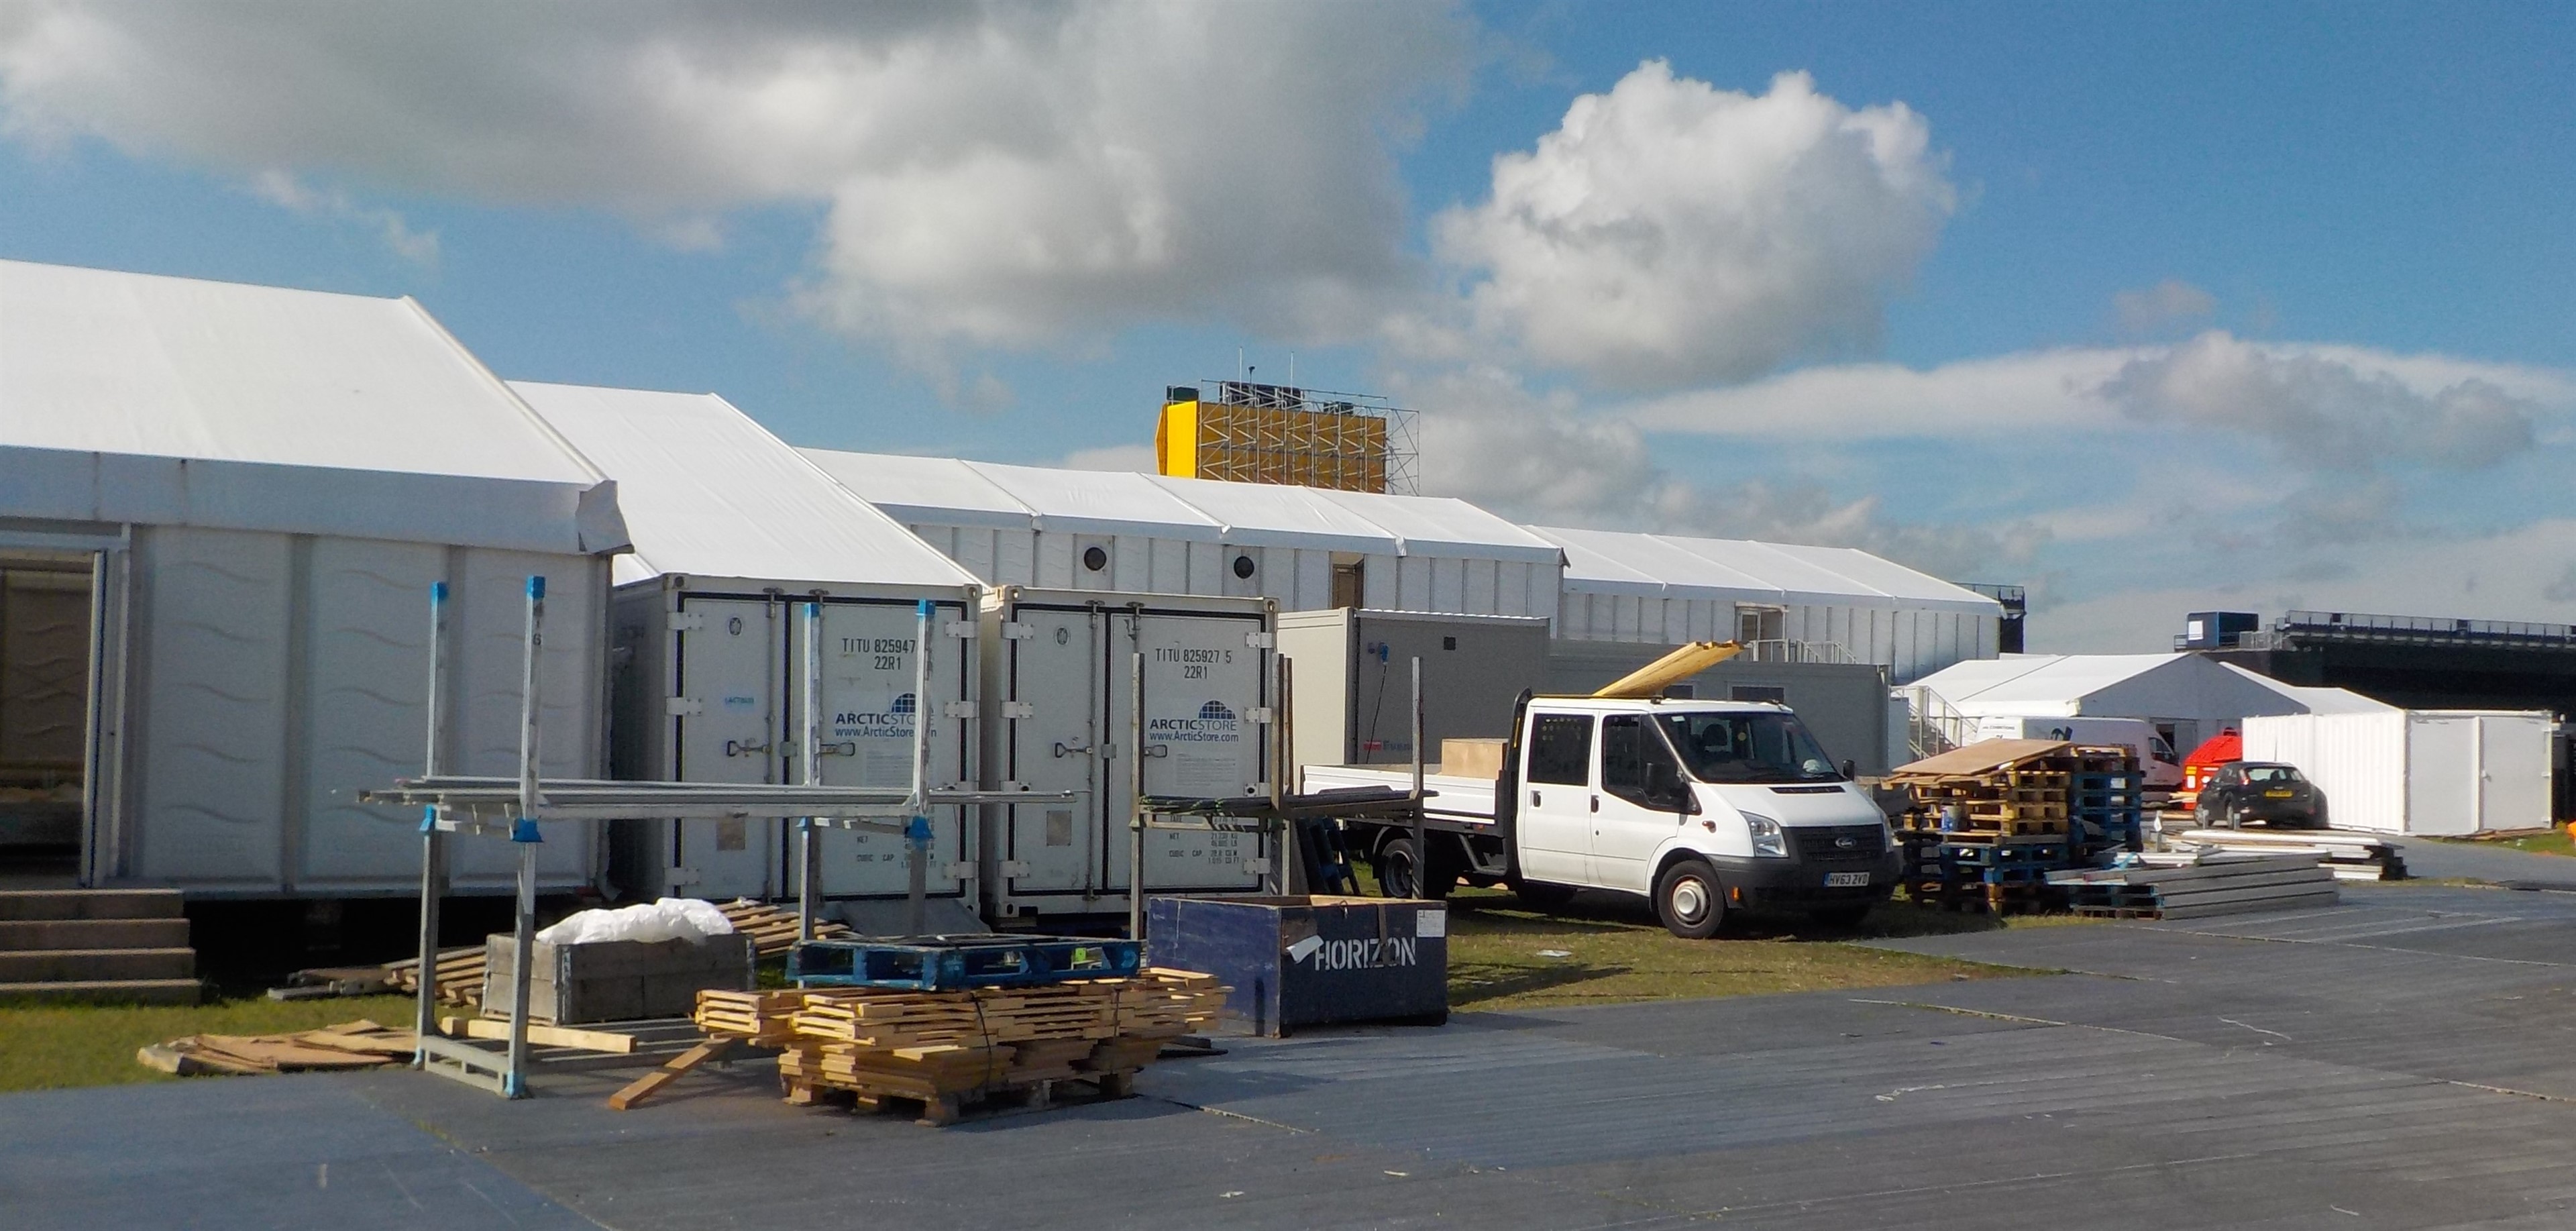 RETAIL, CATERING, BAKERY, PASTRY AND EVENTS - TITAN Containers